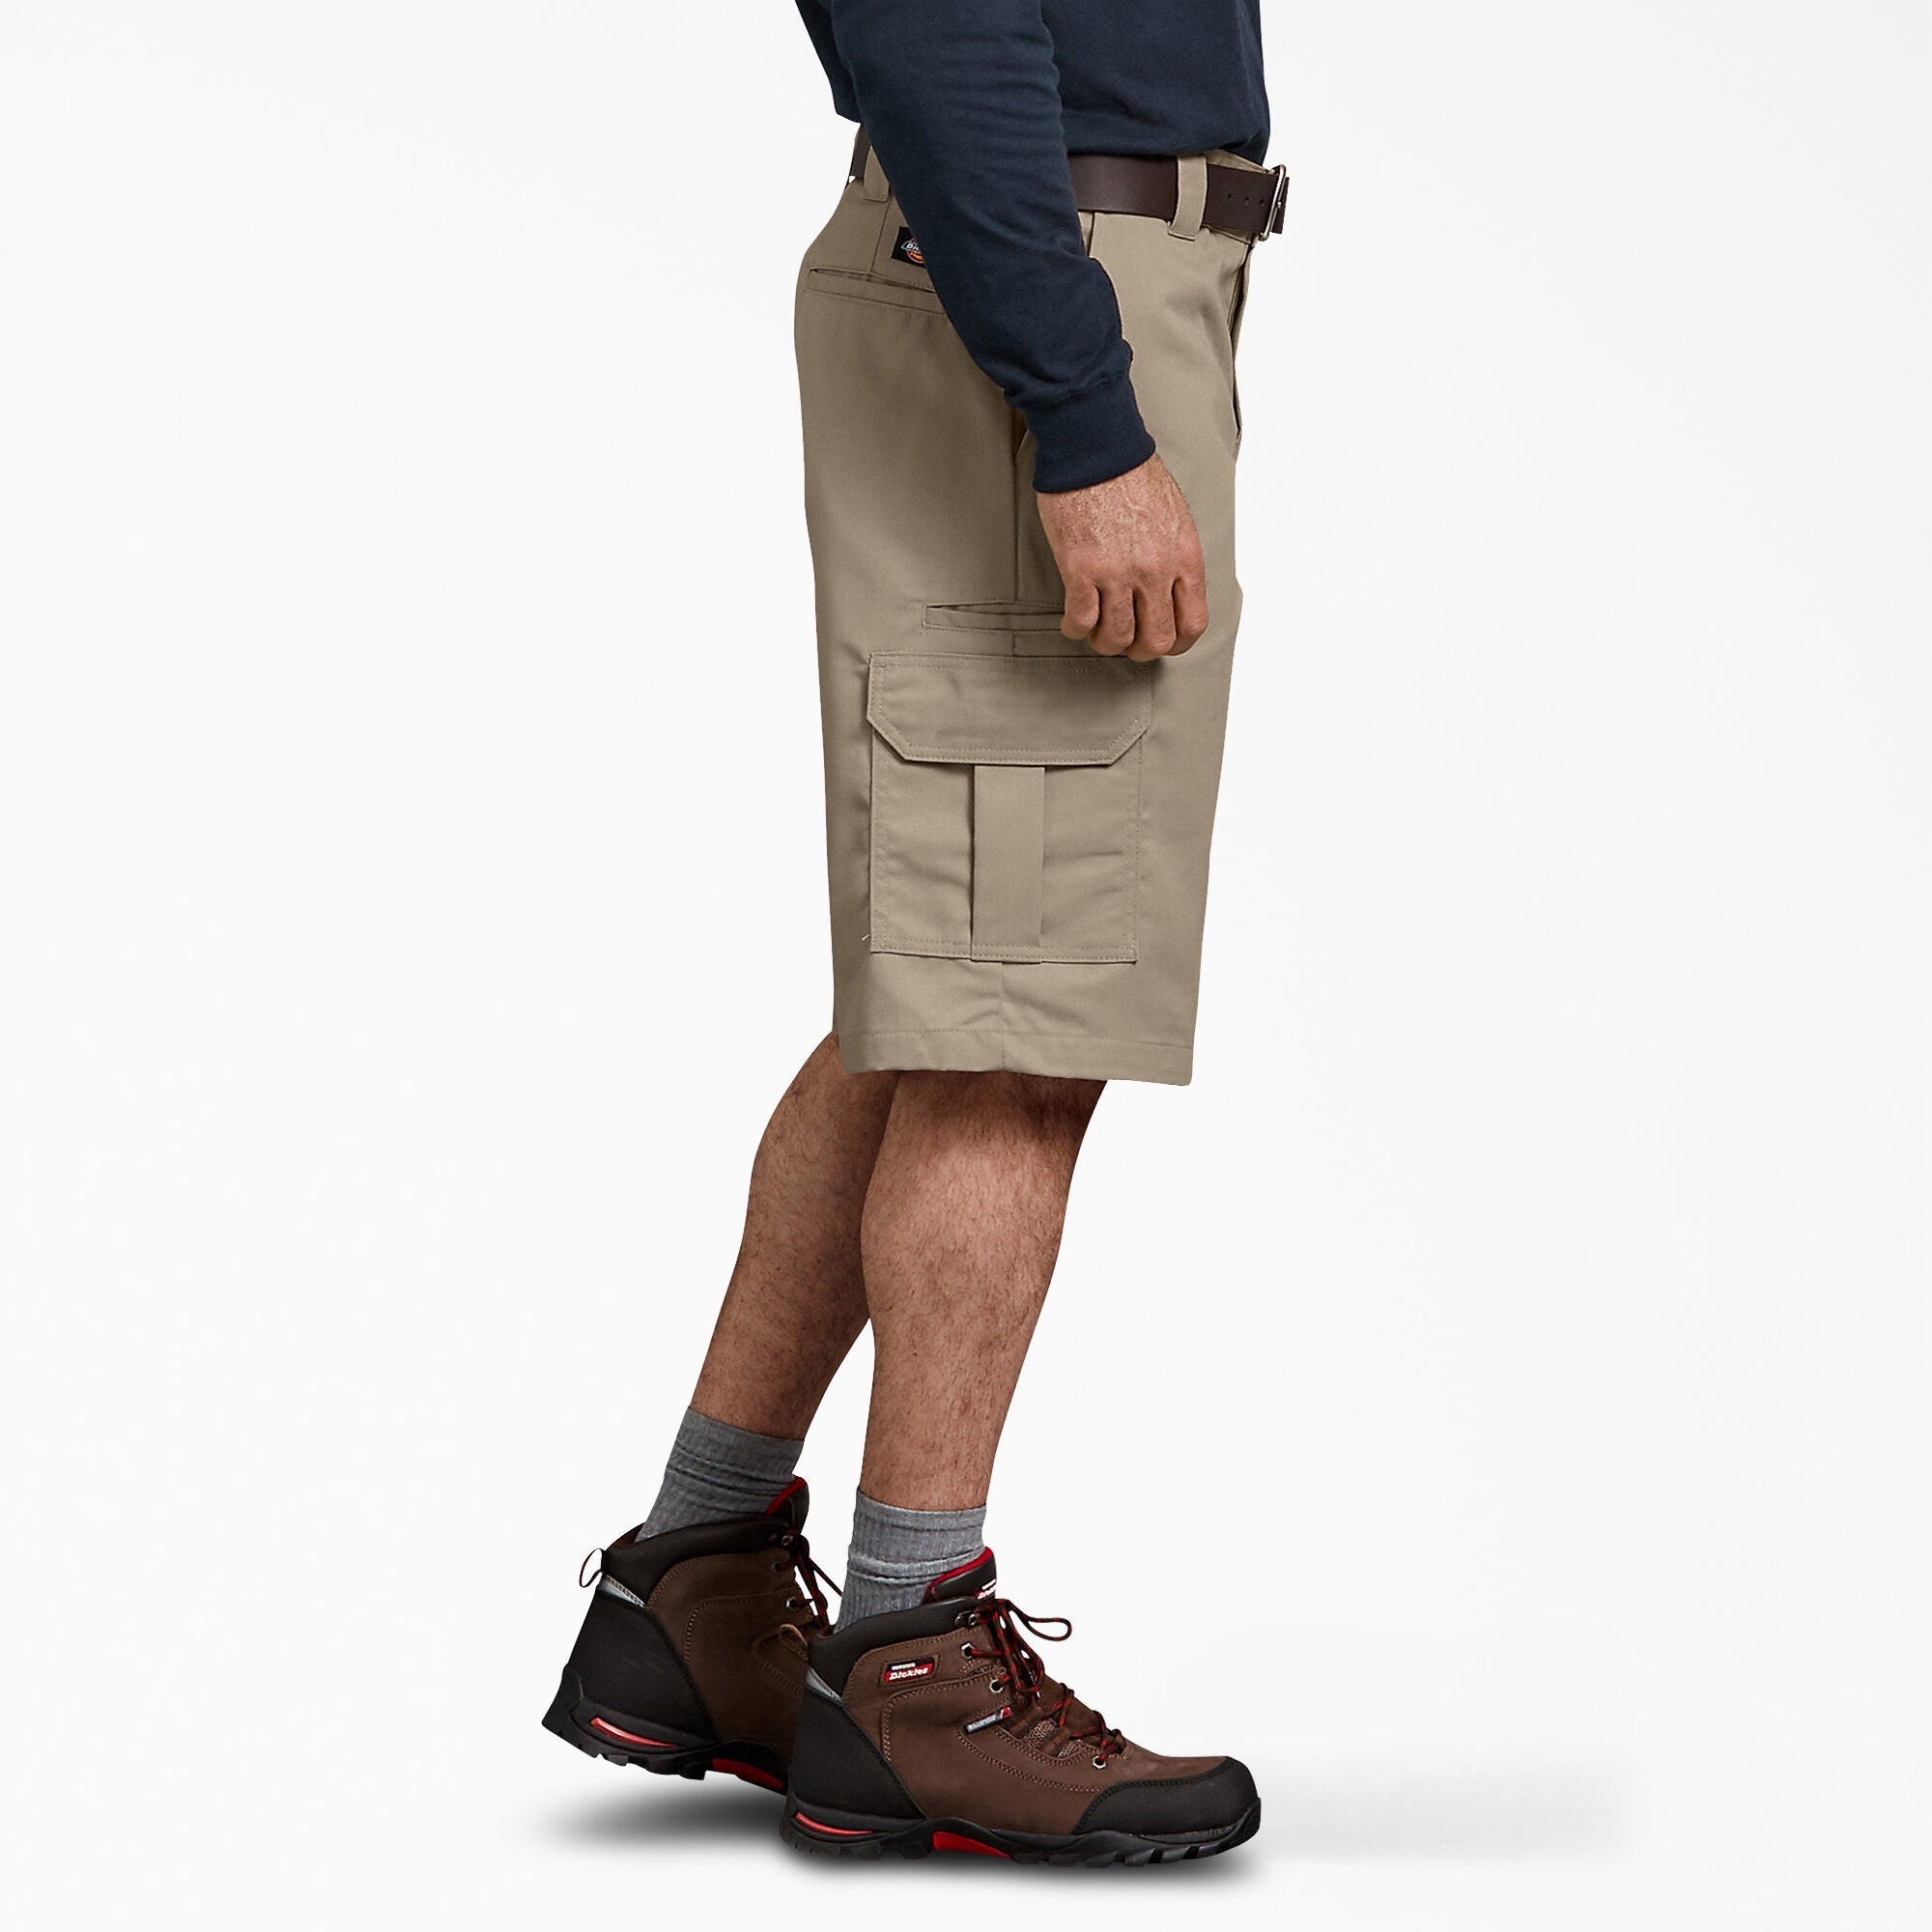 Dickies Relaxed Fit Cargo Shorts, 13, Desert Sand - The Blue Ox 916